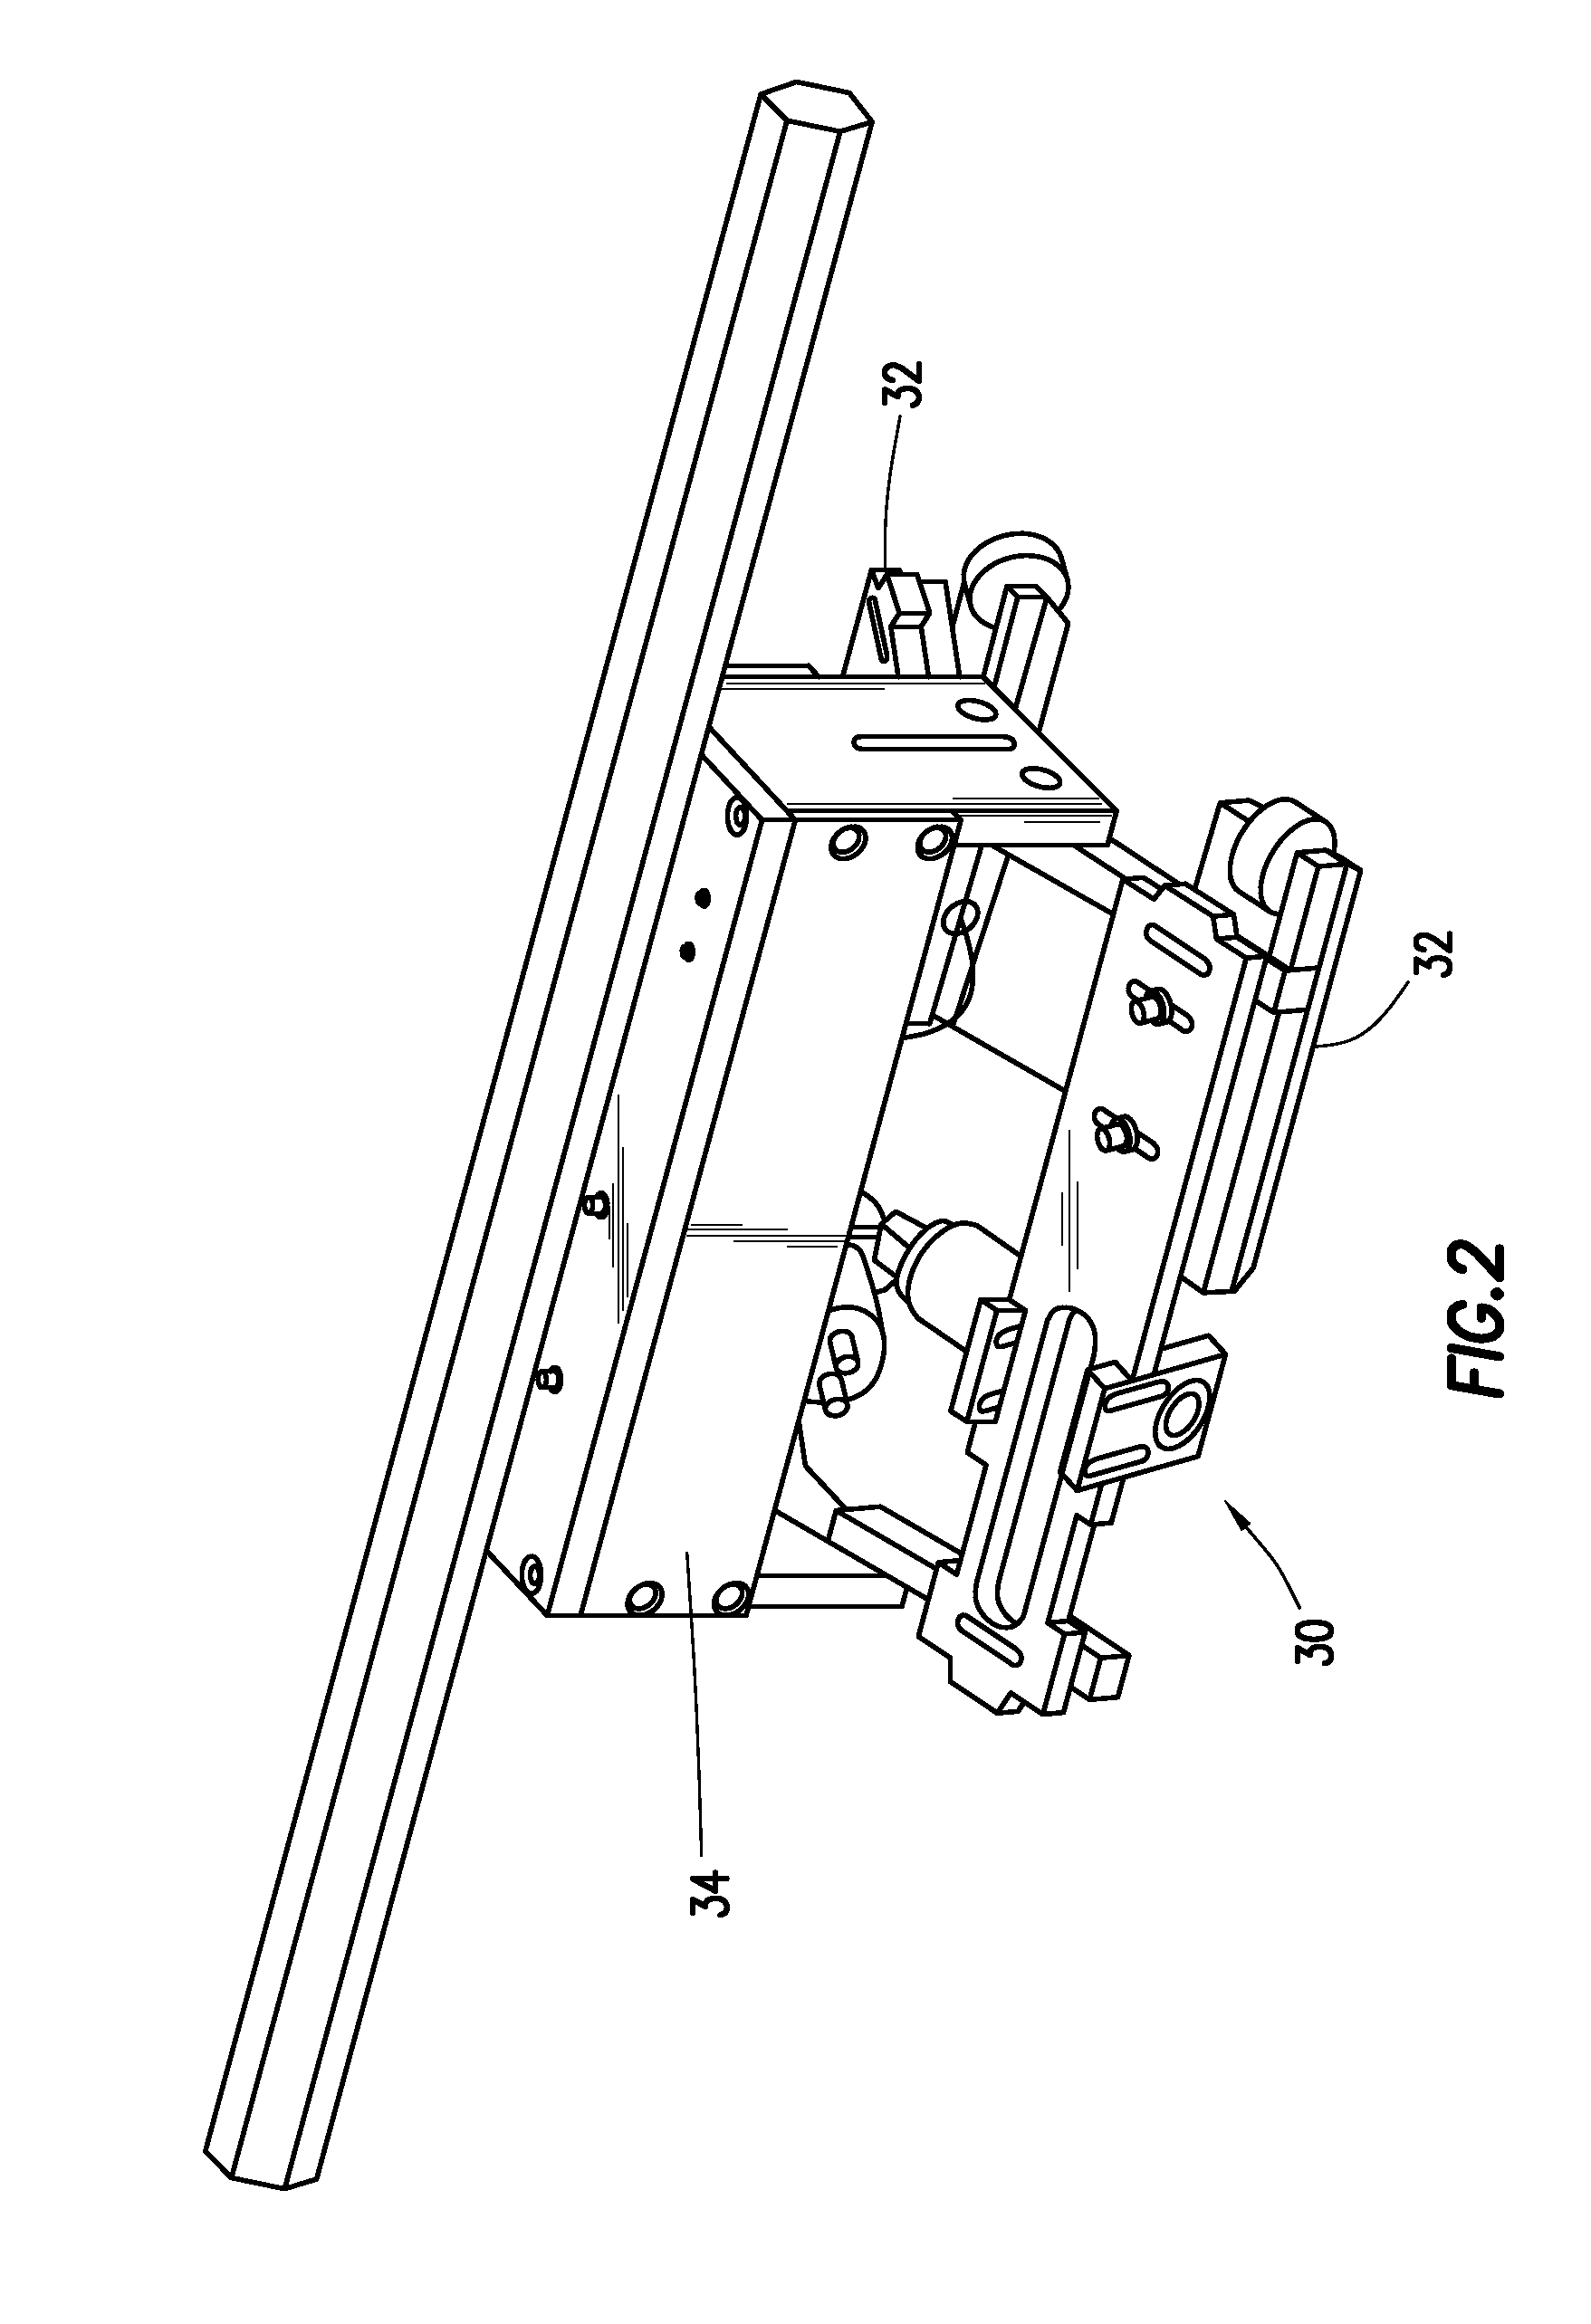 System and Method for Subsea Inspection